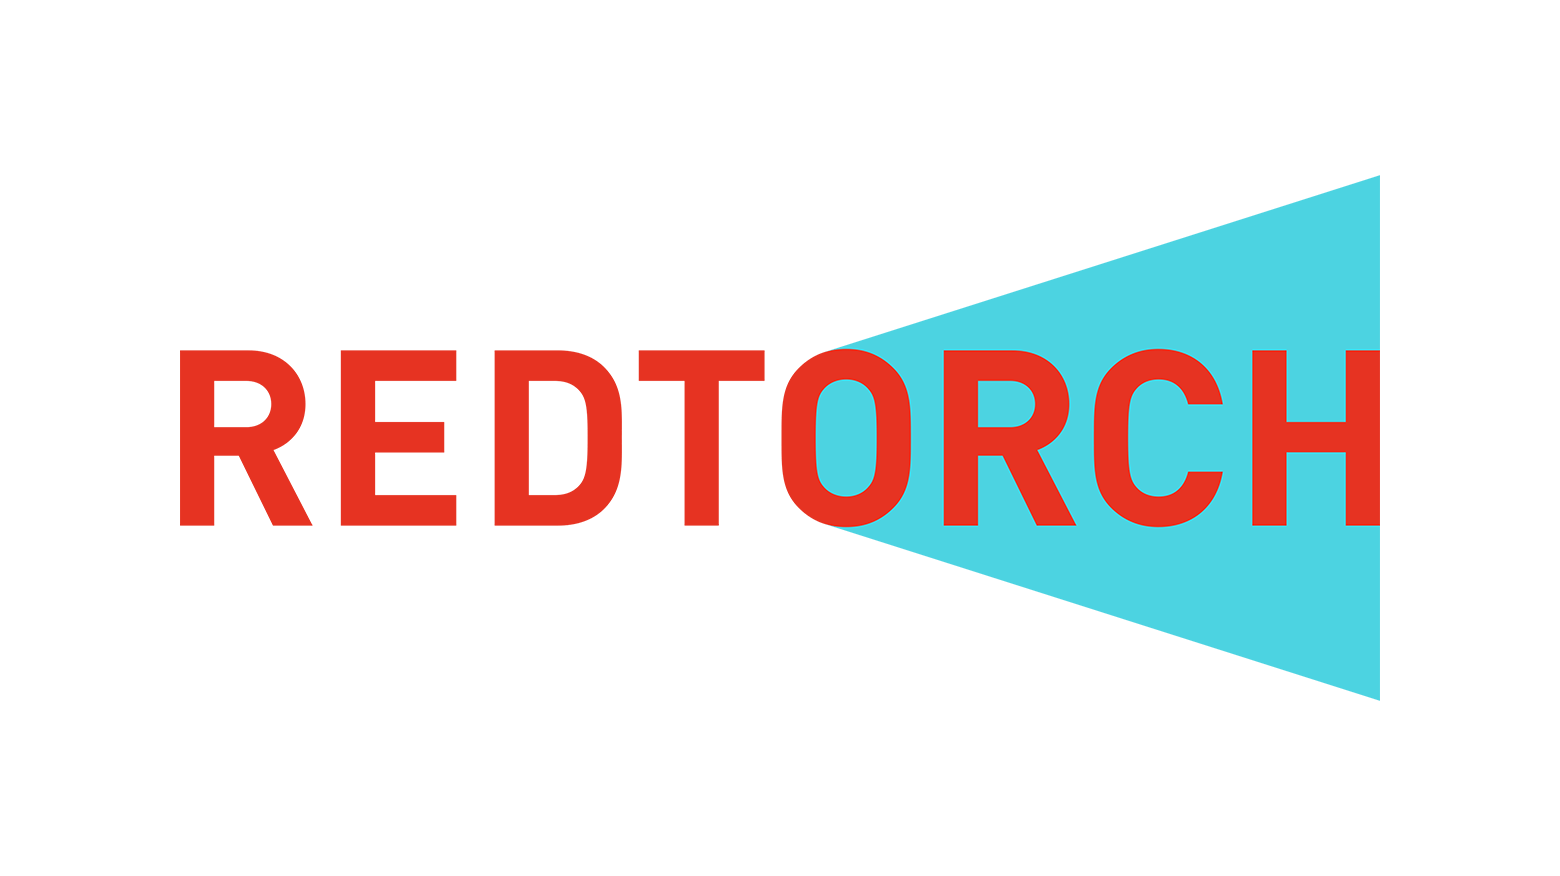 Red and Blue Torch Logo - About | REDTORCH